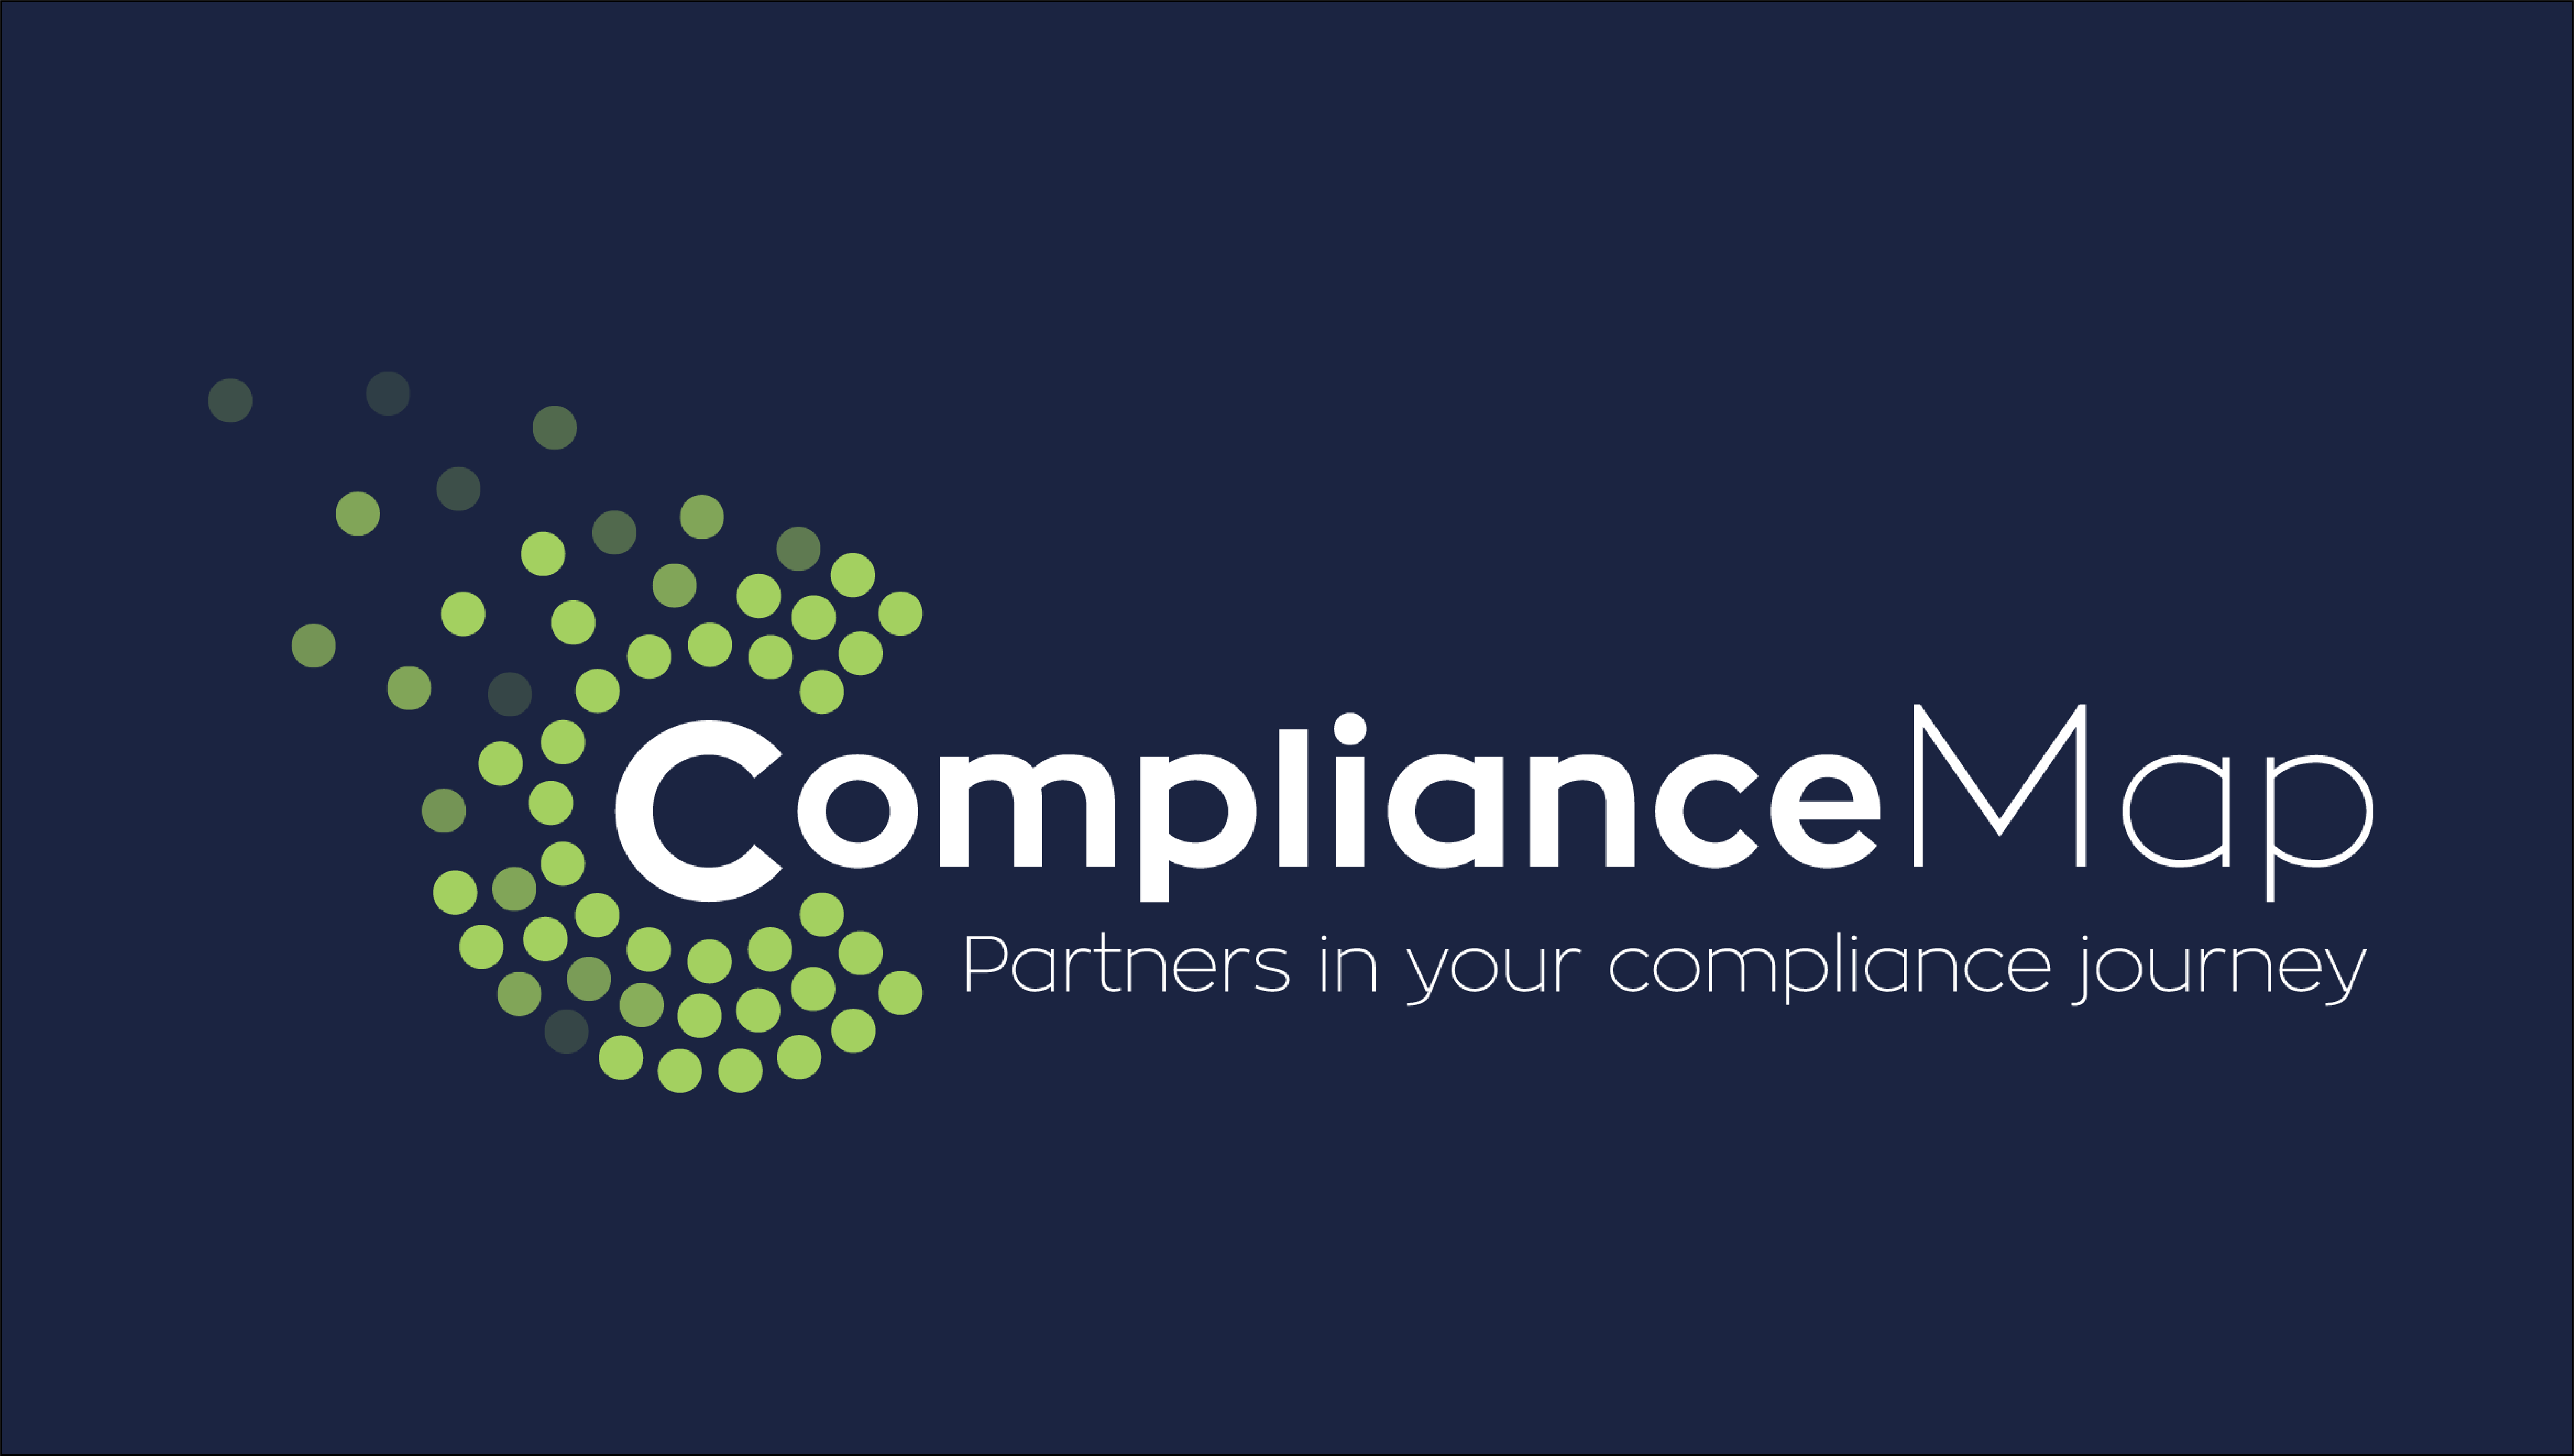 The Compliance Map logo